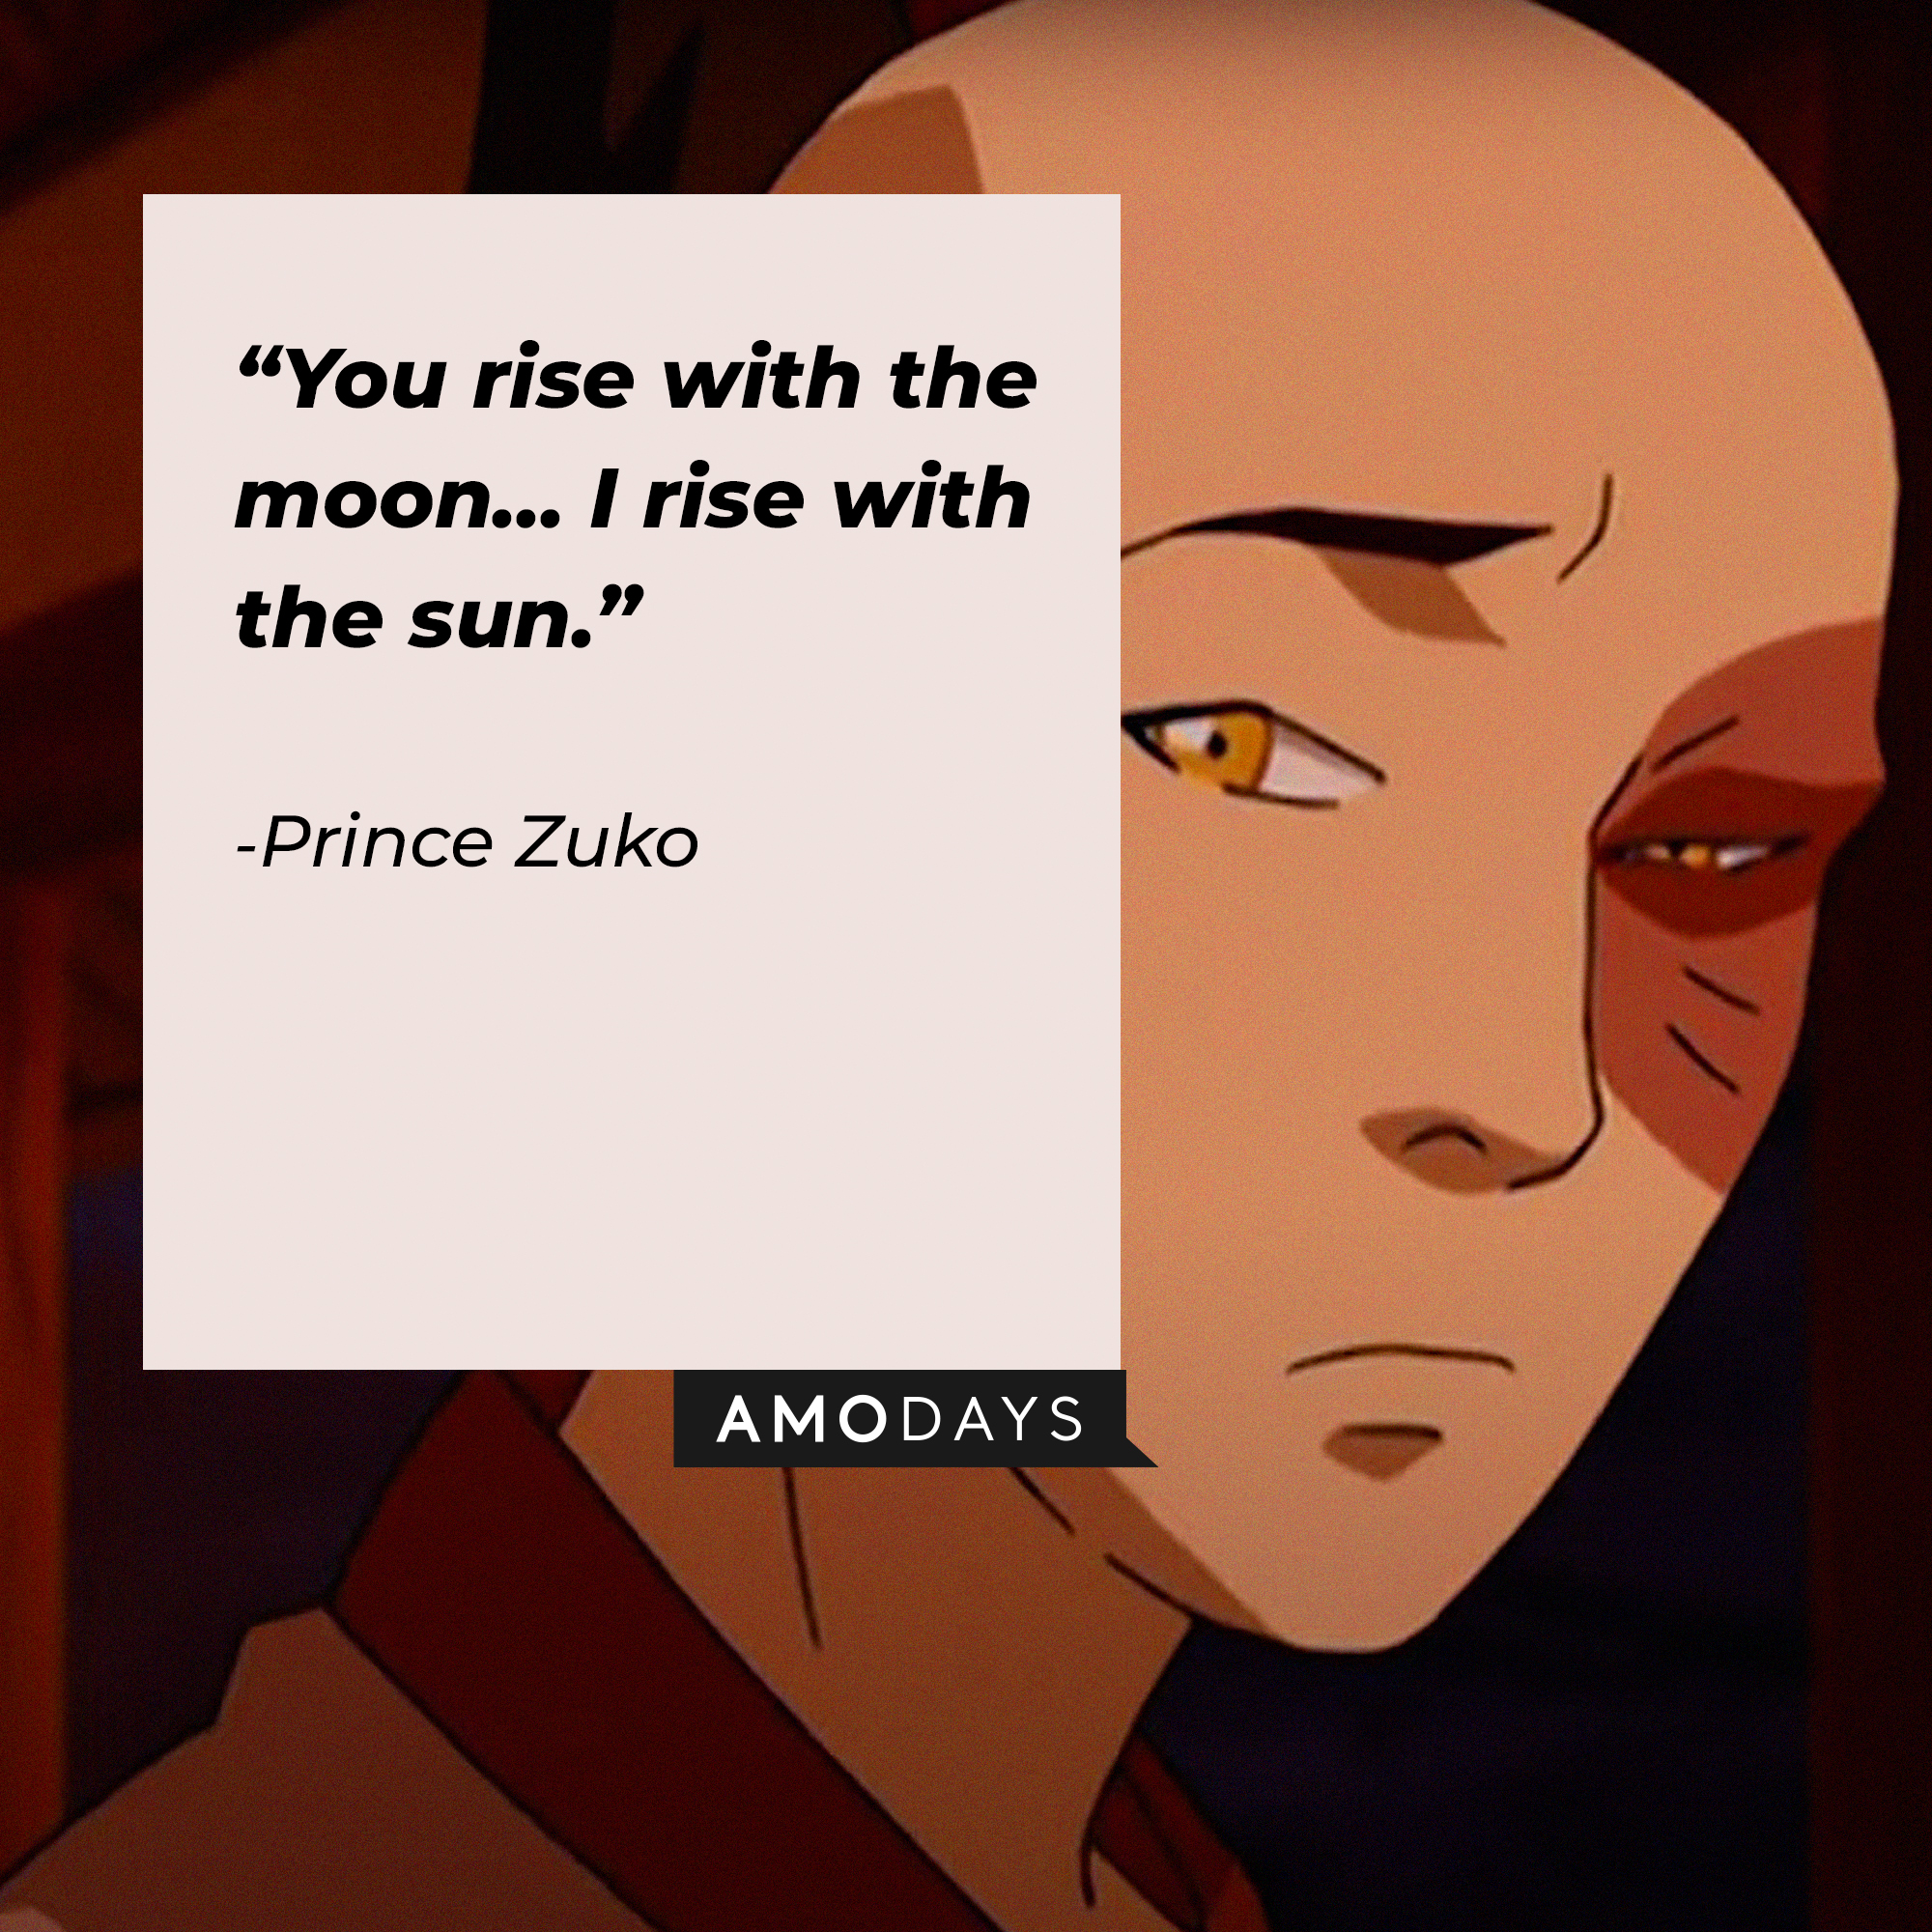 Zuko's quote: "You rise with the moon ... I rise with the sun." | Source: youtube.com/TeamAvatar